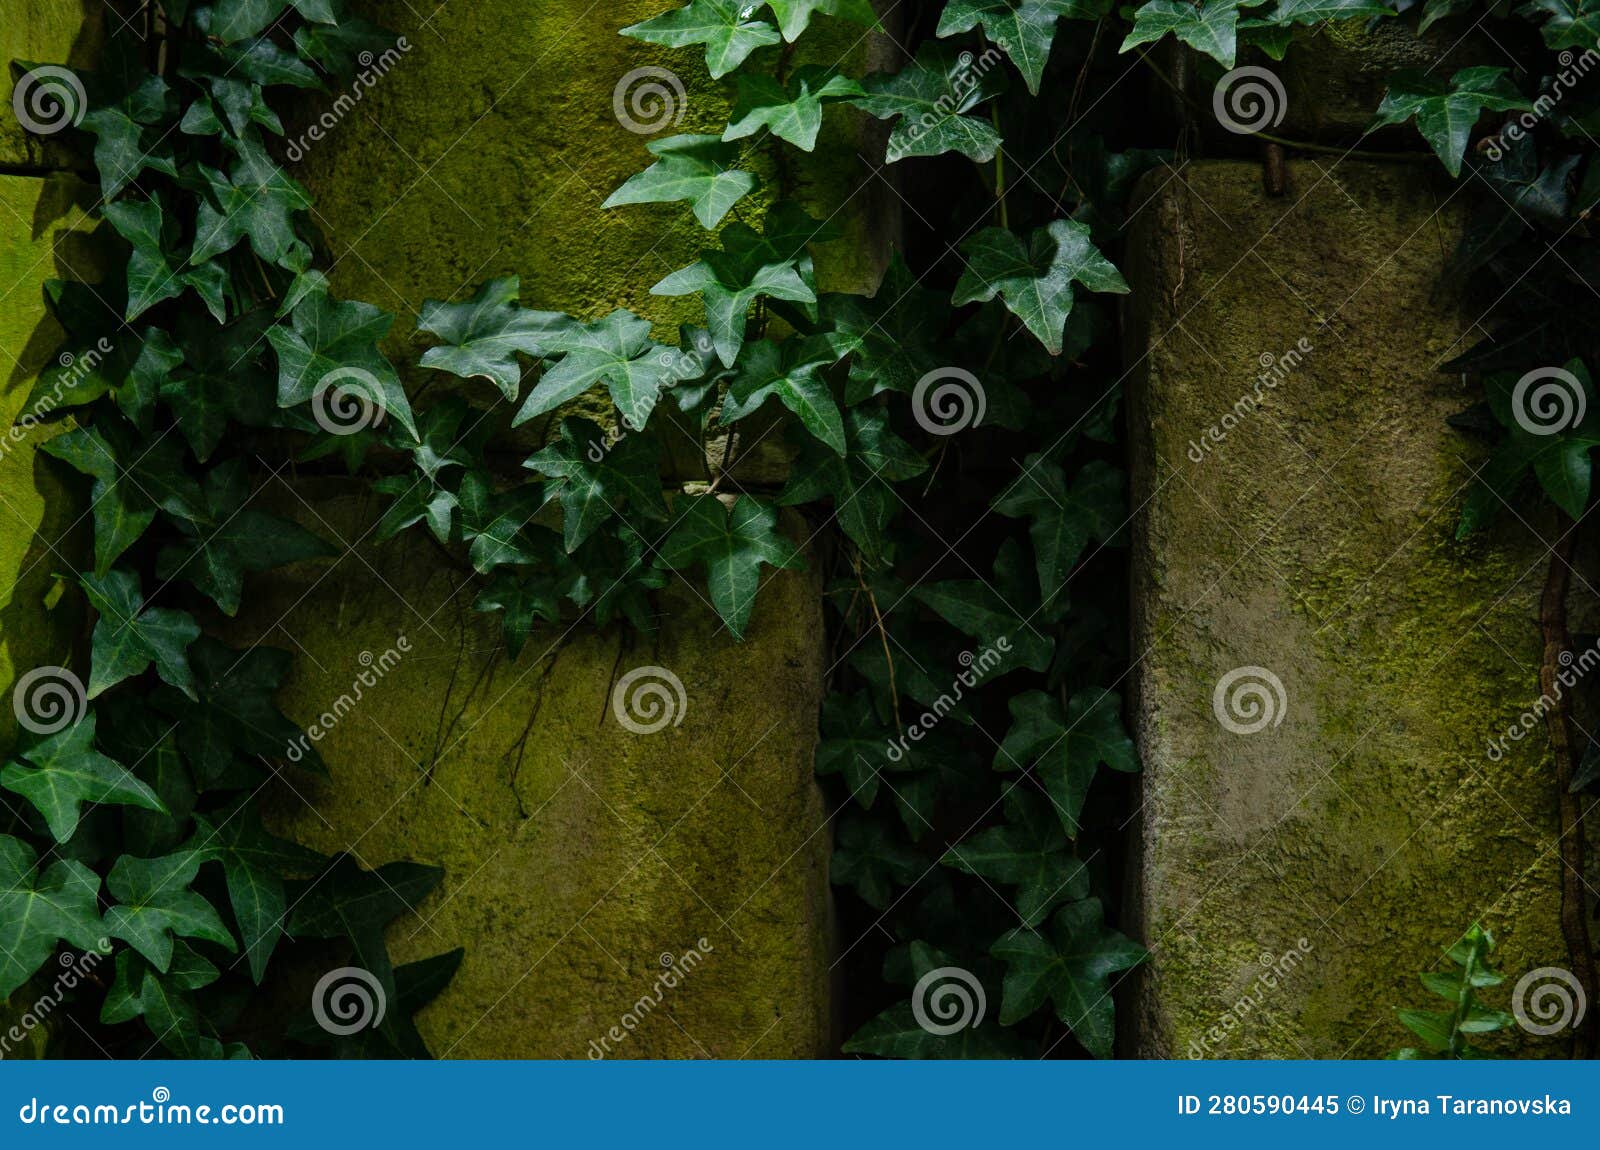 Tropical Green Ivy Plants in a Humid Environment, a Greenhouse with ...